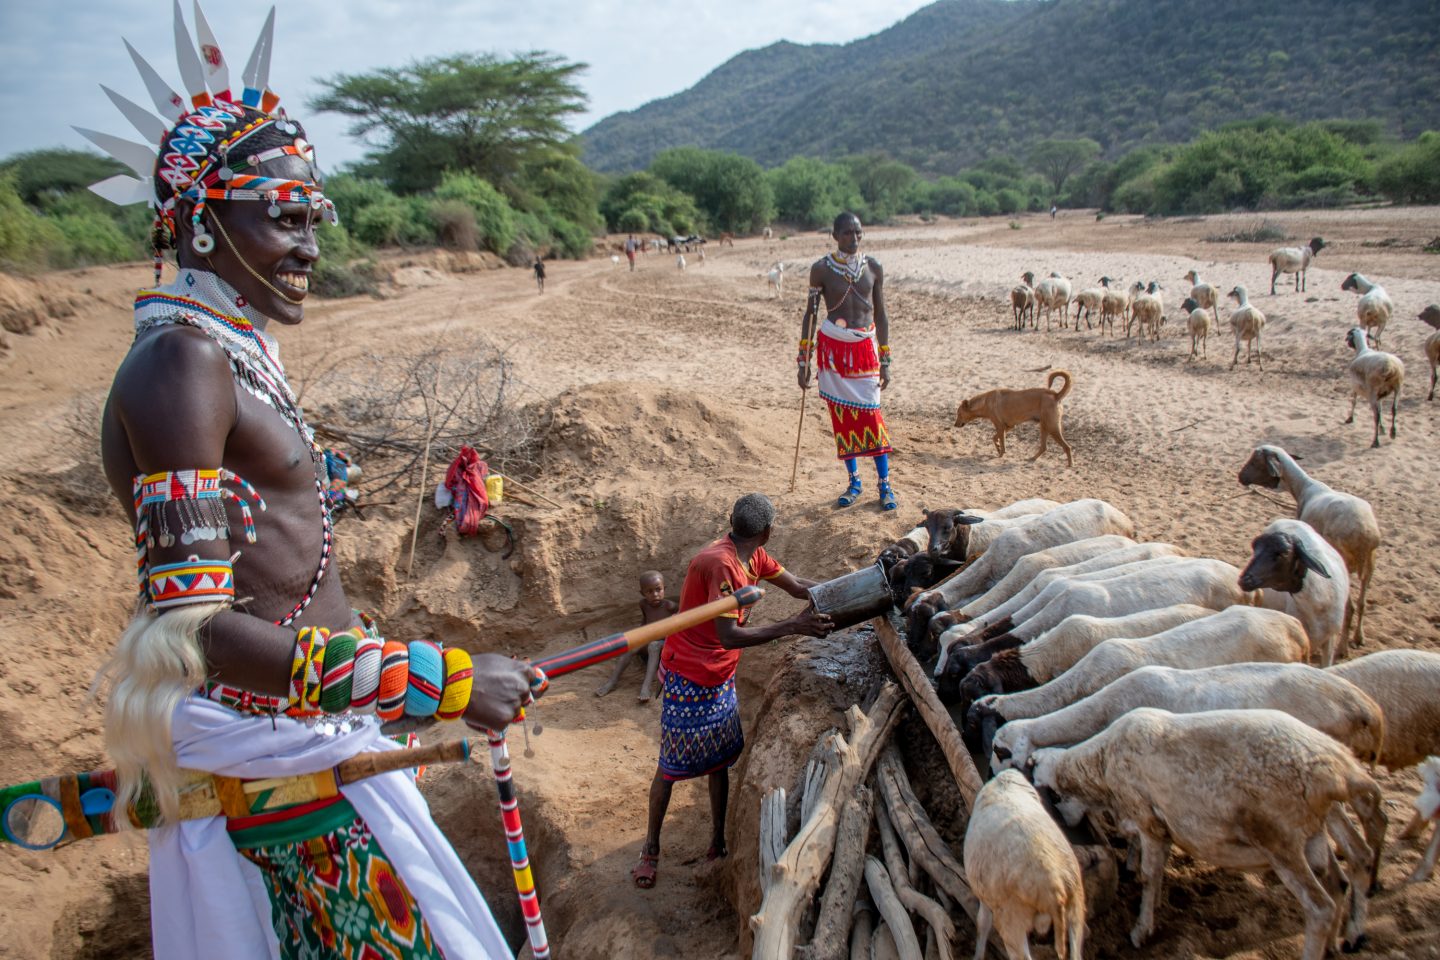  Culture: Samburu guides are encyclopaedias of knowledge and proud of their deep heritage which is still central to their way of life today. Living a semi nomadic lifestyle, cattle, as well as goats, sheep and camels, play a vital role in the Samburu way of life and culture. Credit: Kalepo